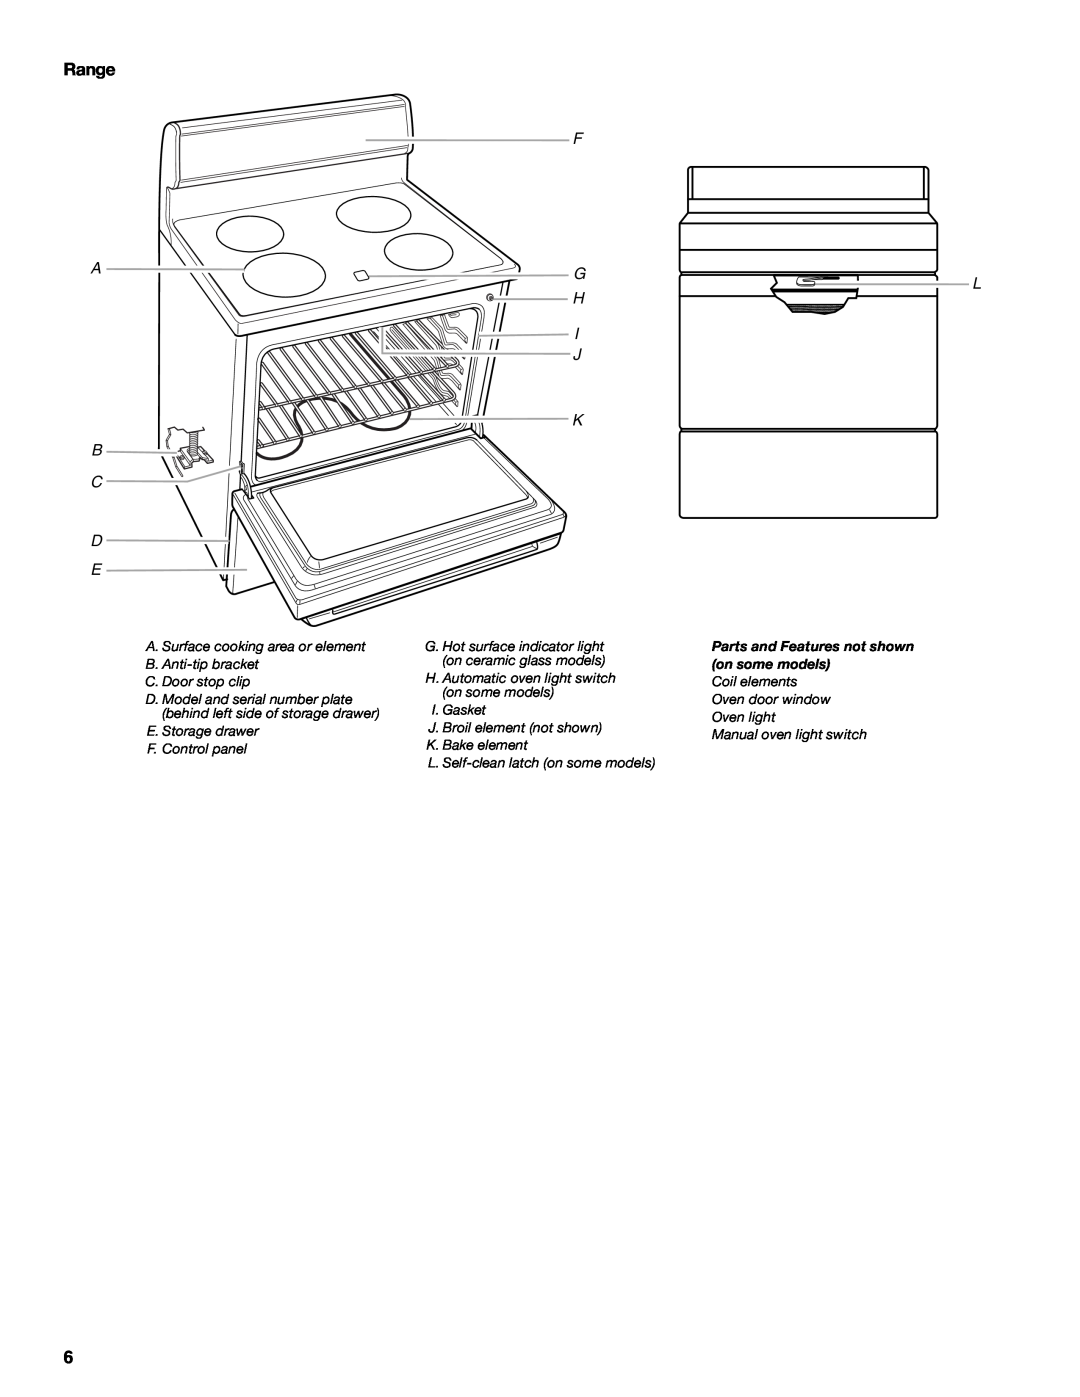 Whirlpool W10017750B2 manual Range, F A G H I J K B C D E, Parts and Features not shown on some models 